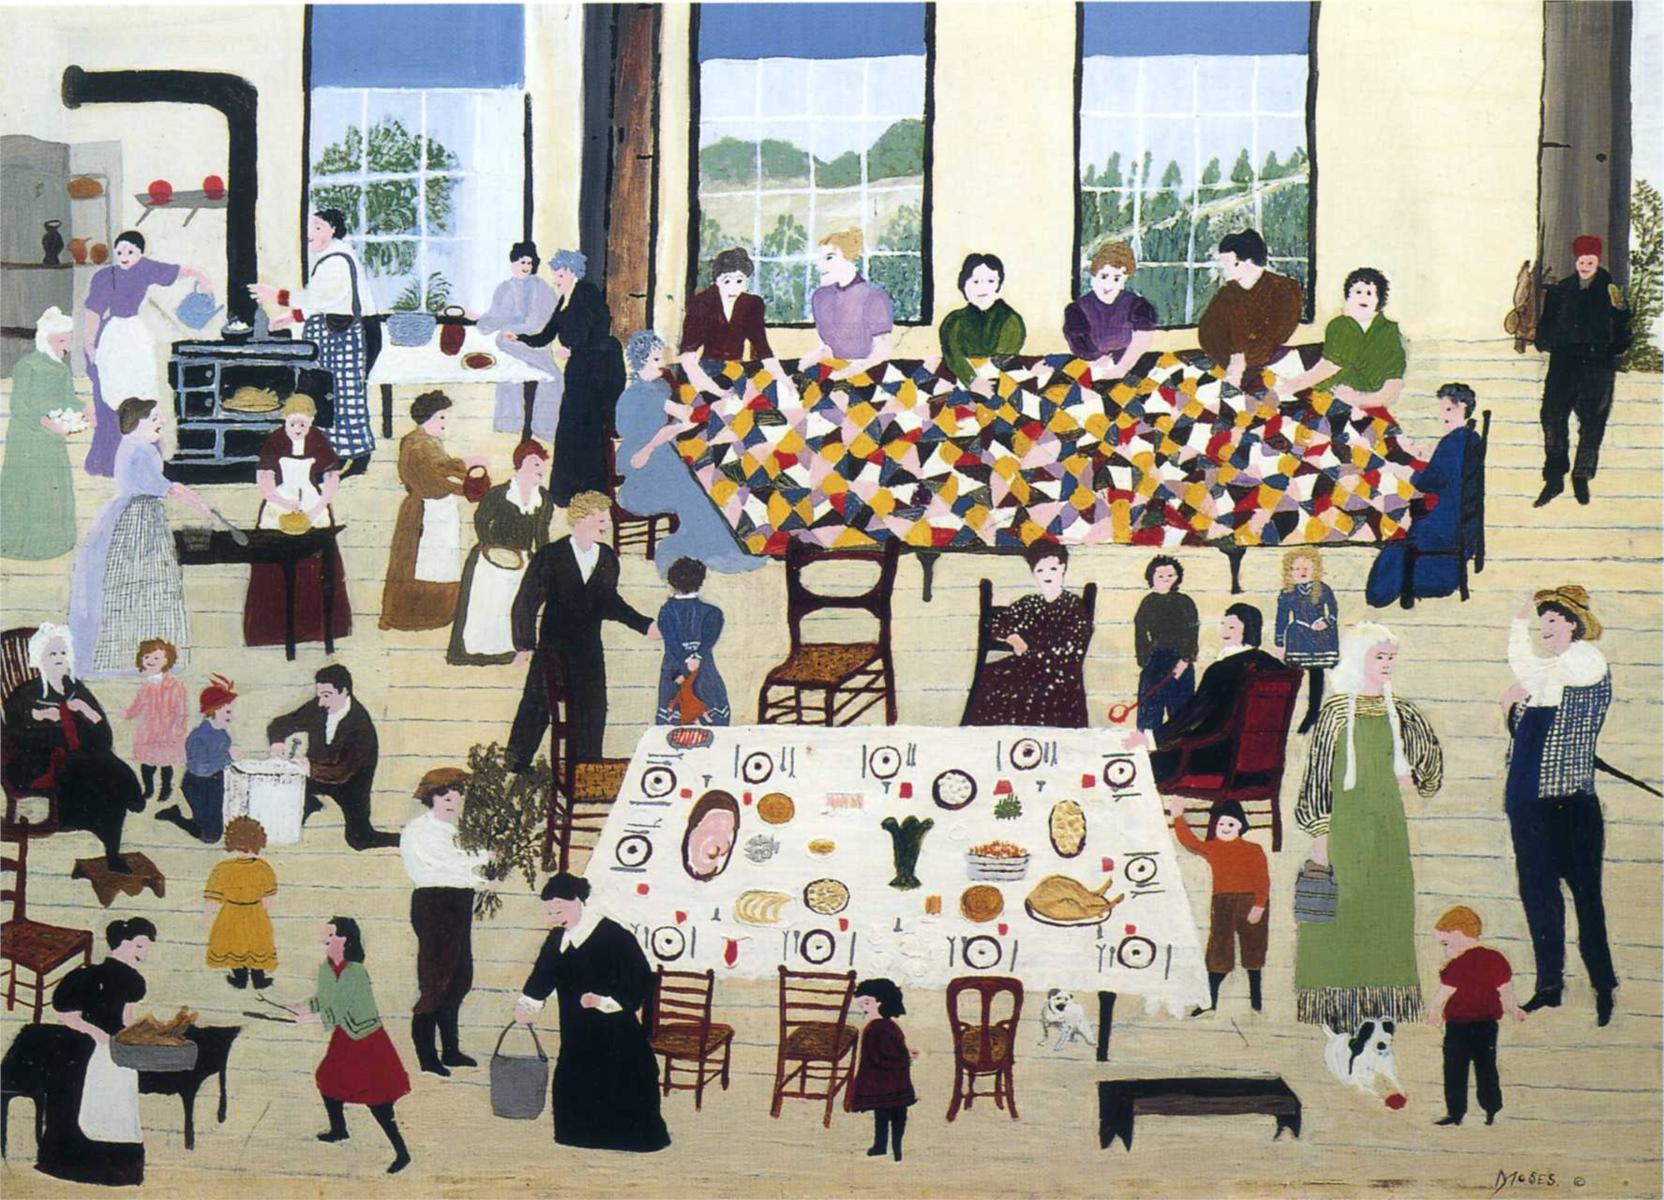 The Quilting Bee by Grandma Moses - 1940-1950 - - private collection